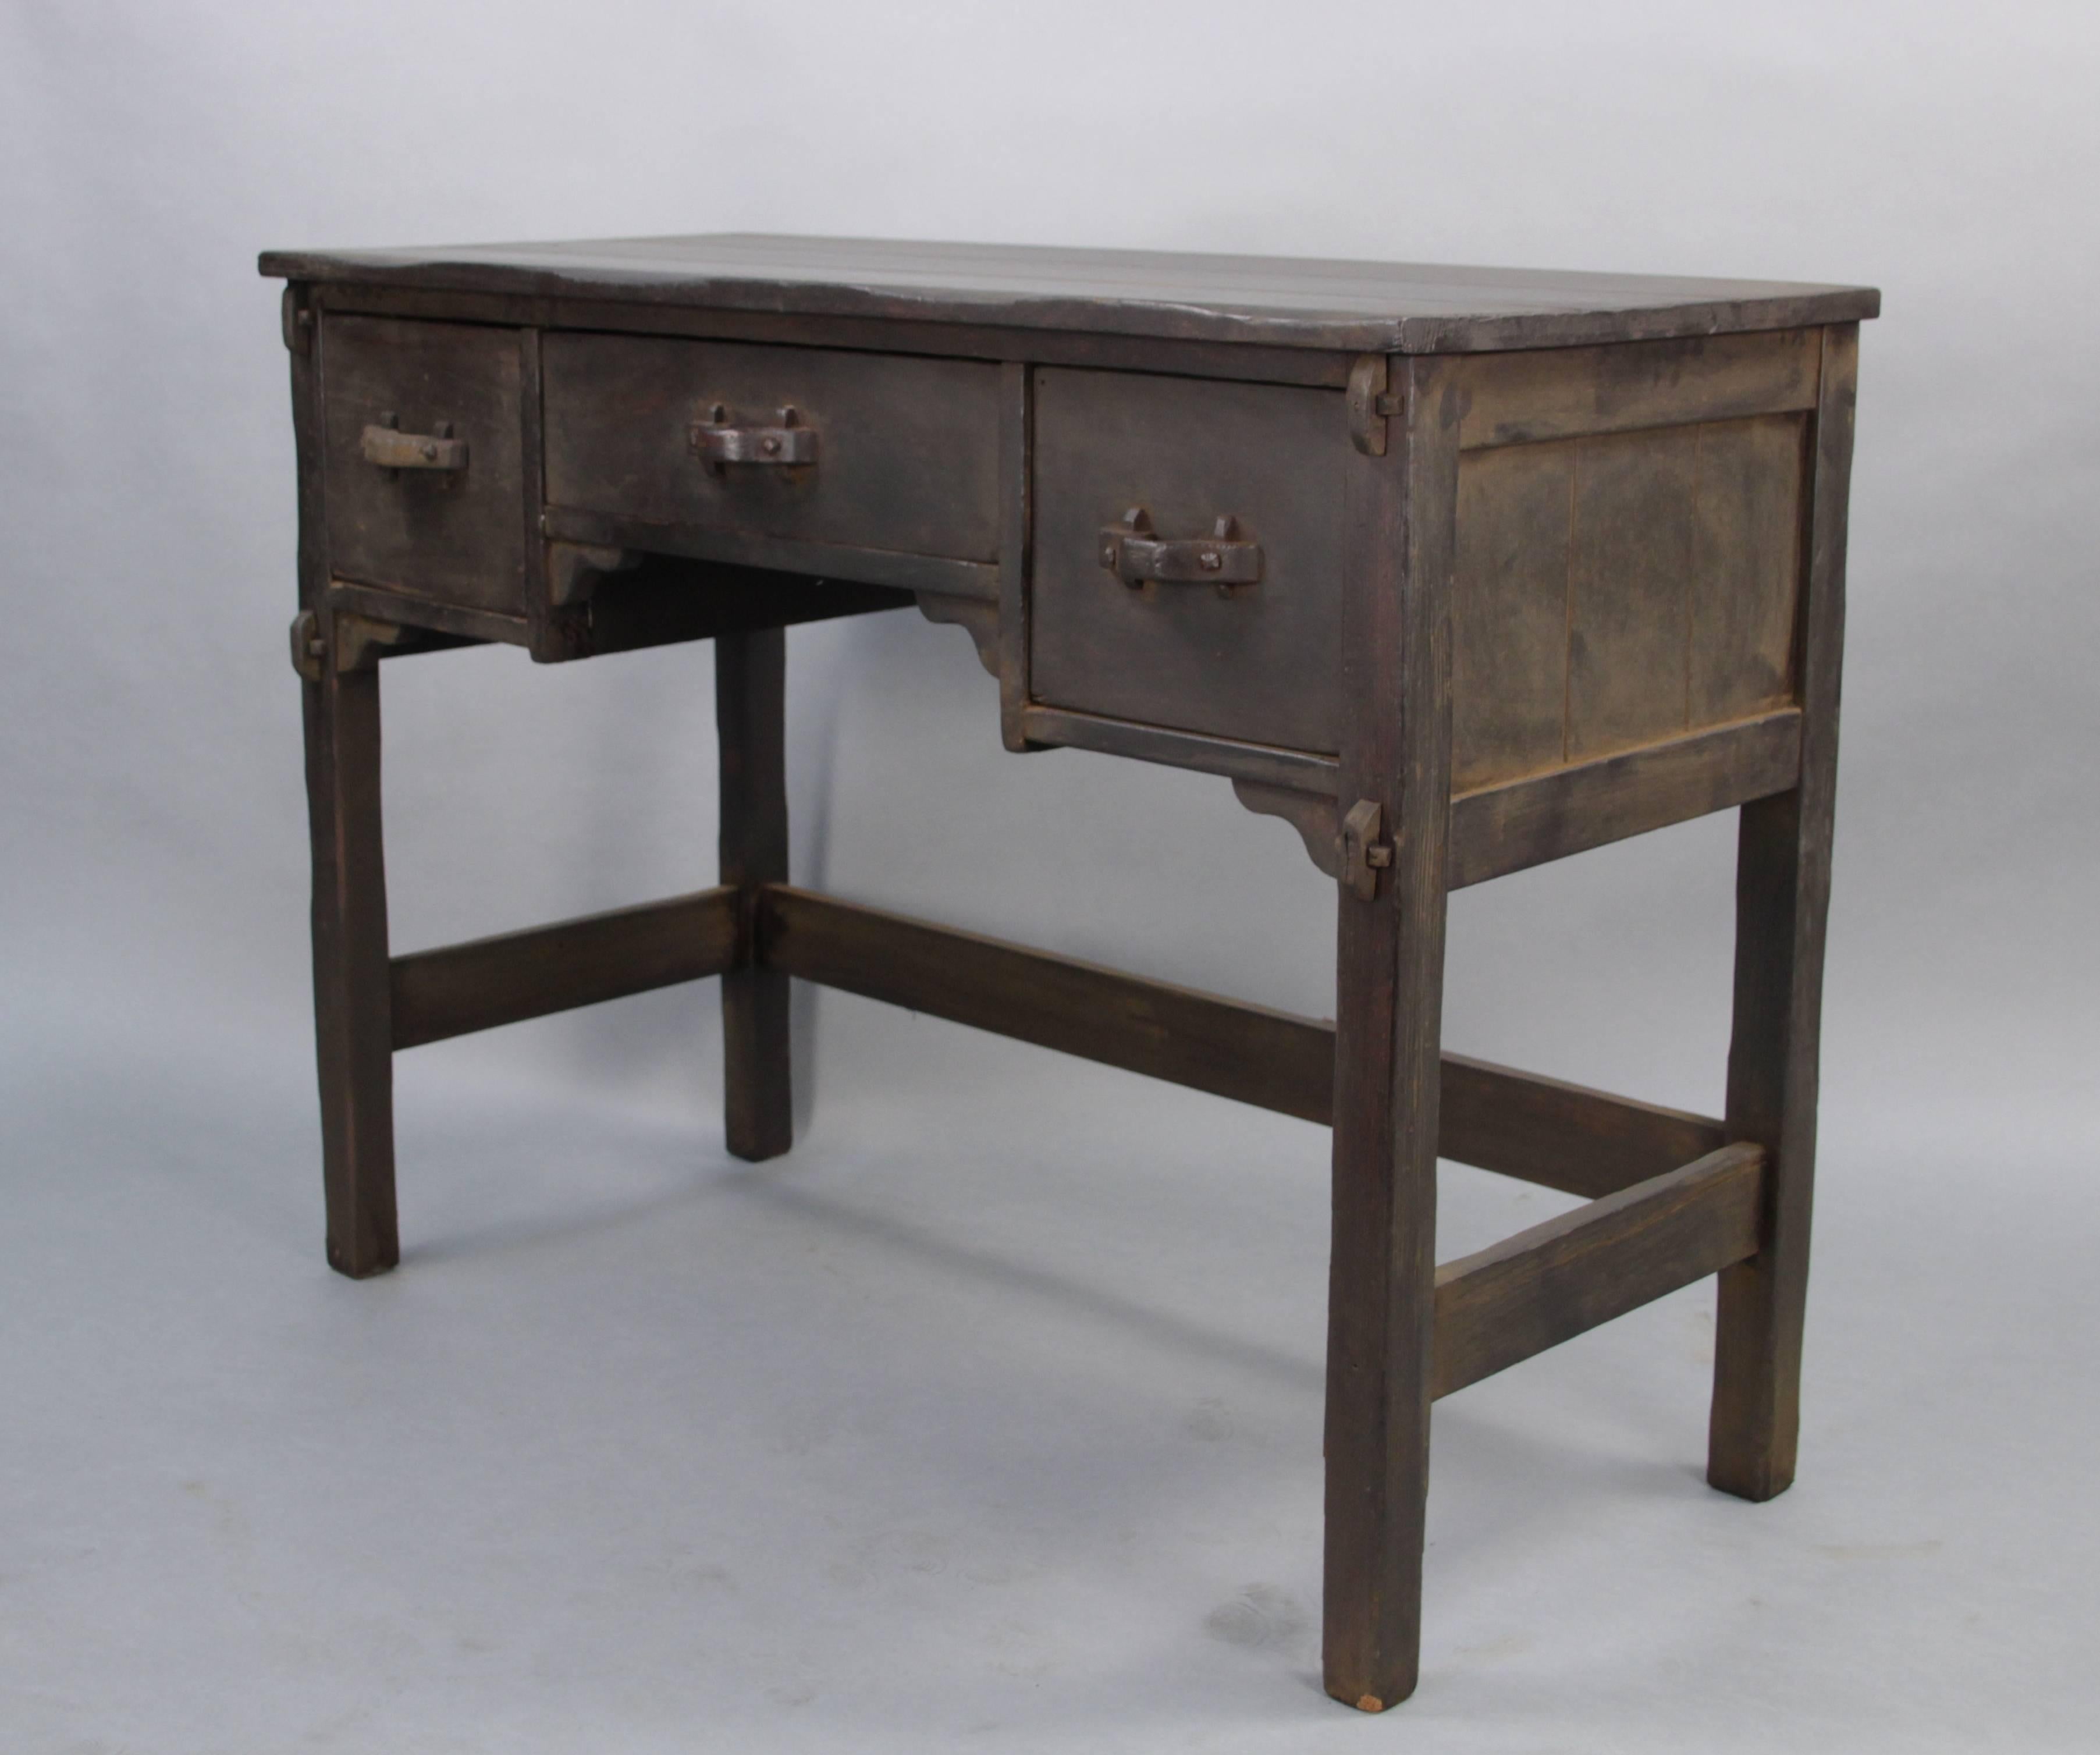 1930s Monterey period desk with three drawers.